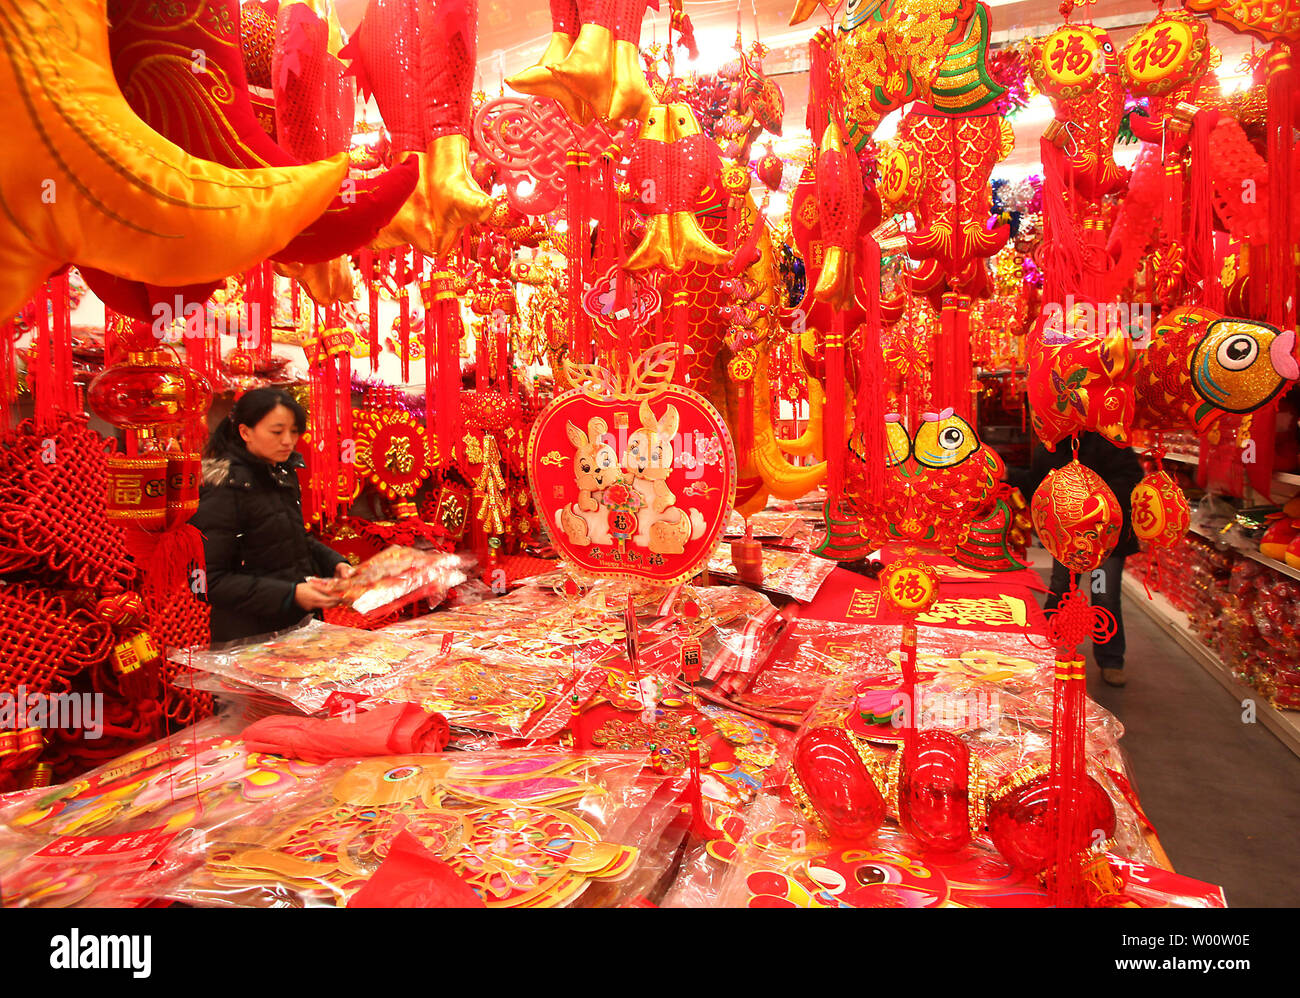 Chinese Shop Are Newly Decked Out With Traditional Chinese Lunar New Year Merchandise And Decorations All Designed To Bring Good Luck In The Coming Year Of The Rabbit Starting Next Month In